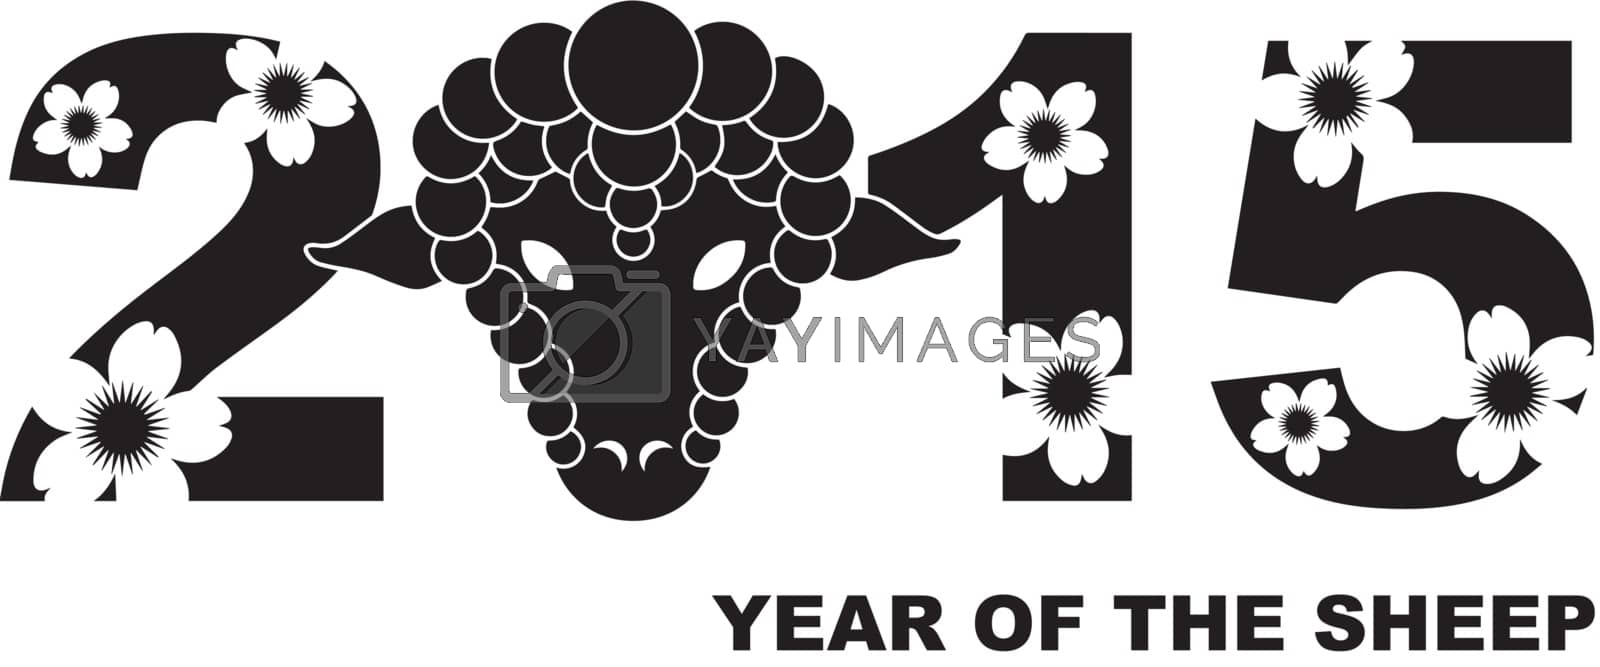 Royalty free image of 2015 Year of the Ram Numerals by jpldesigns